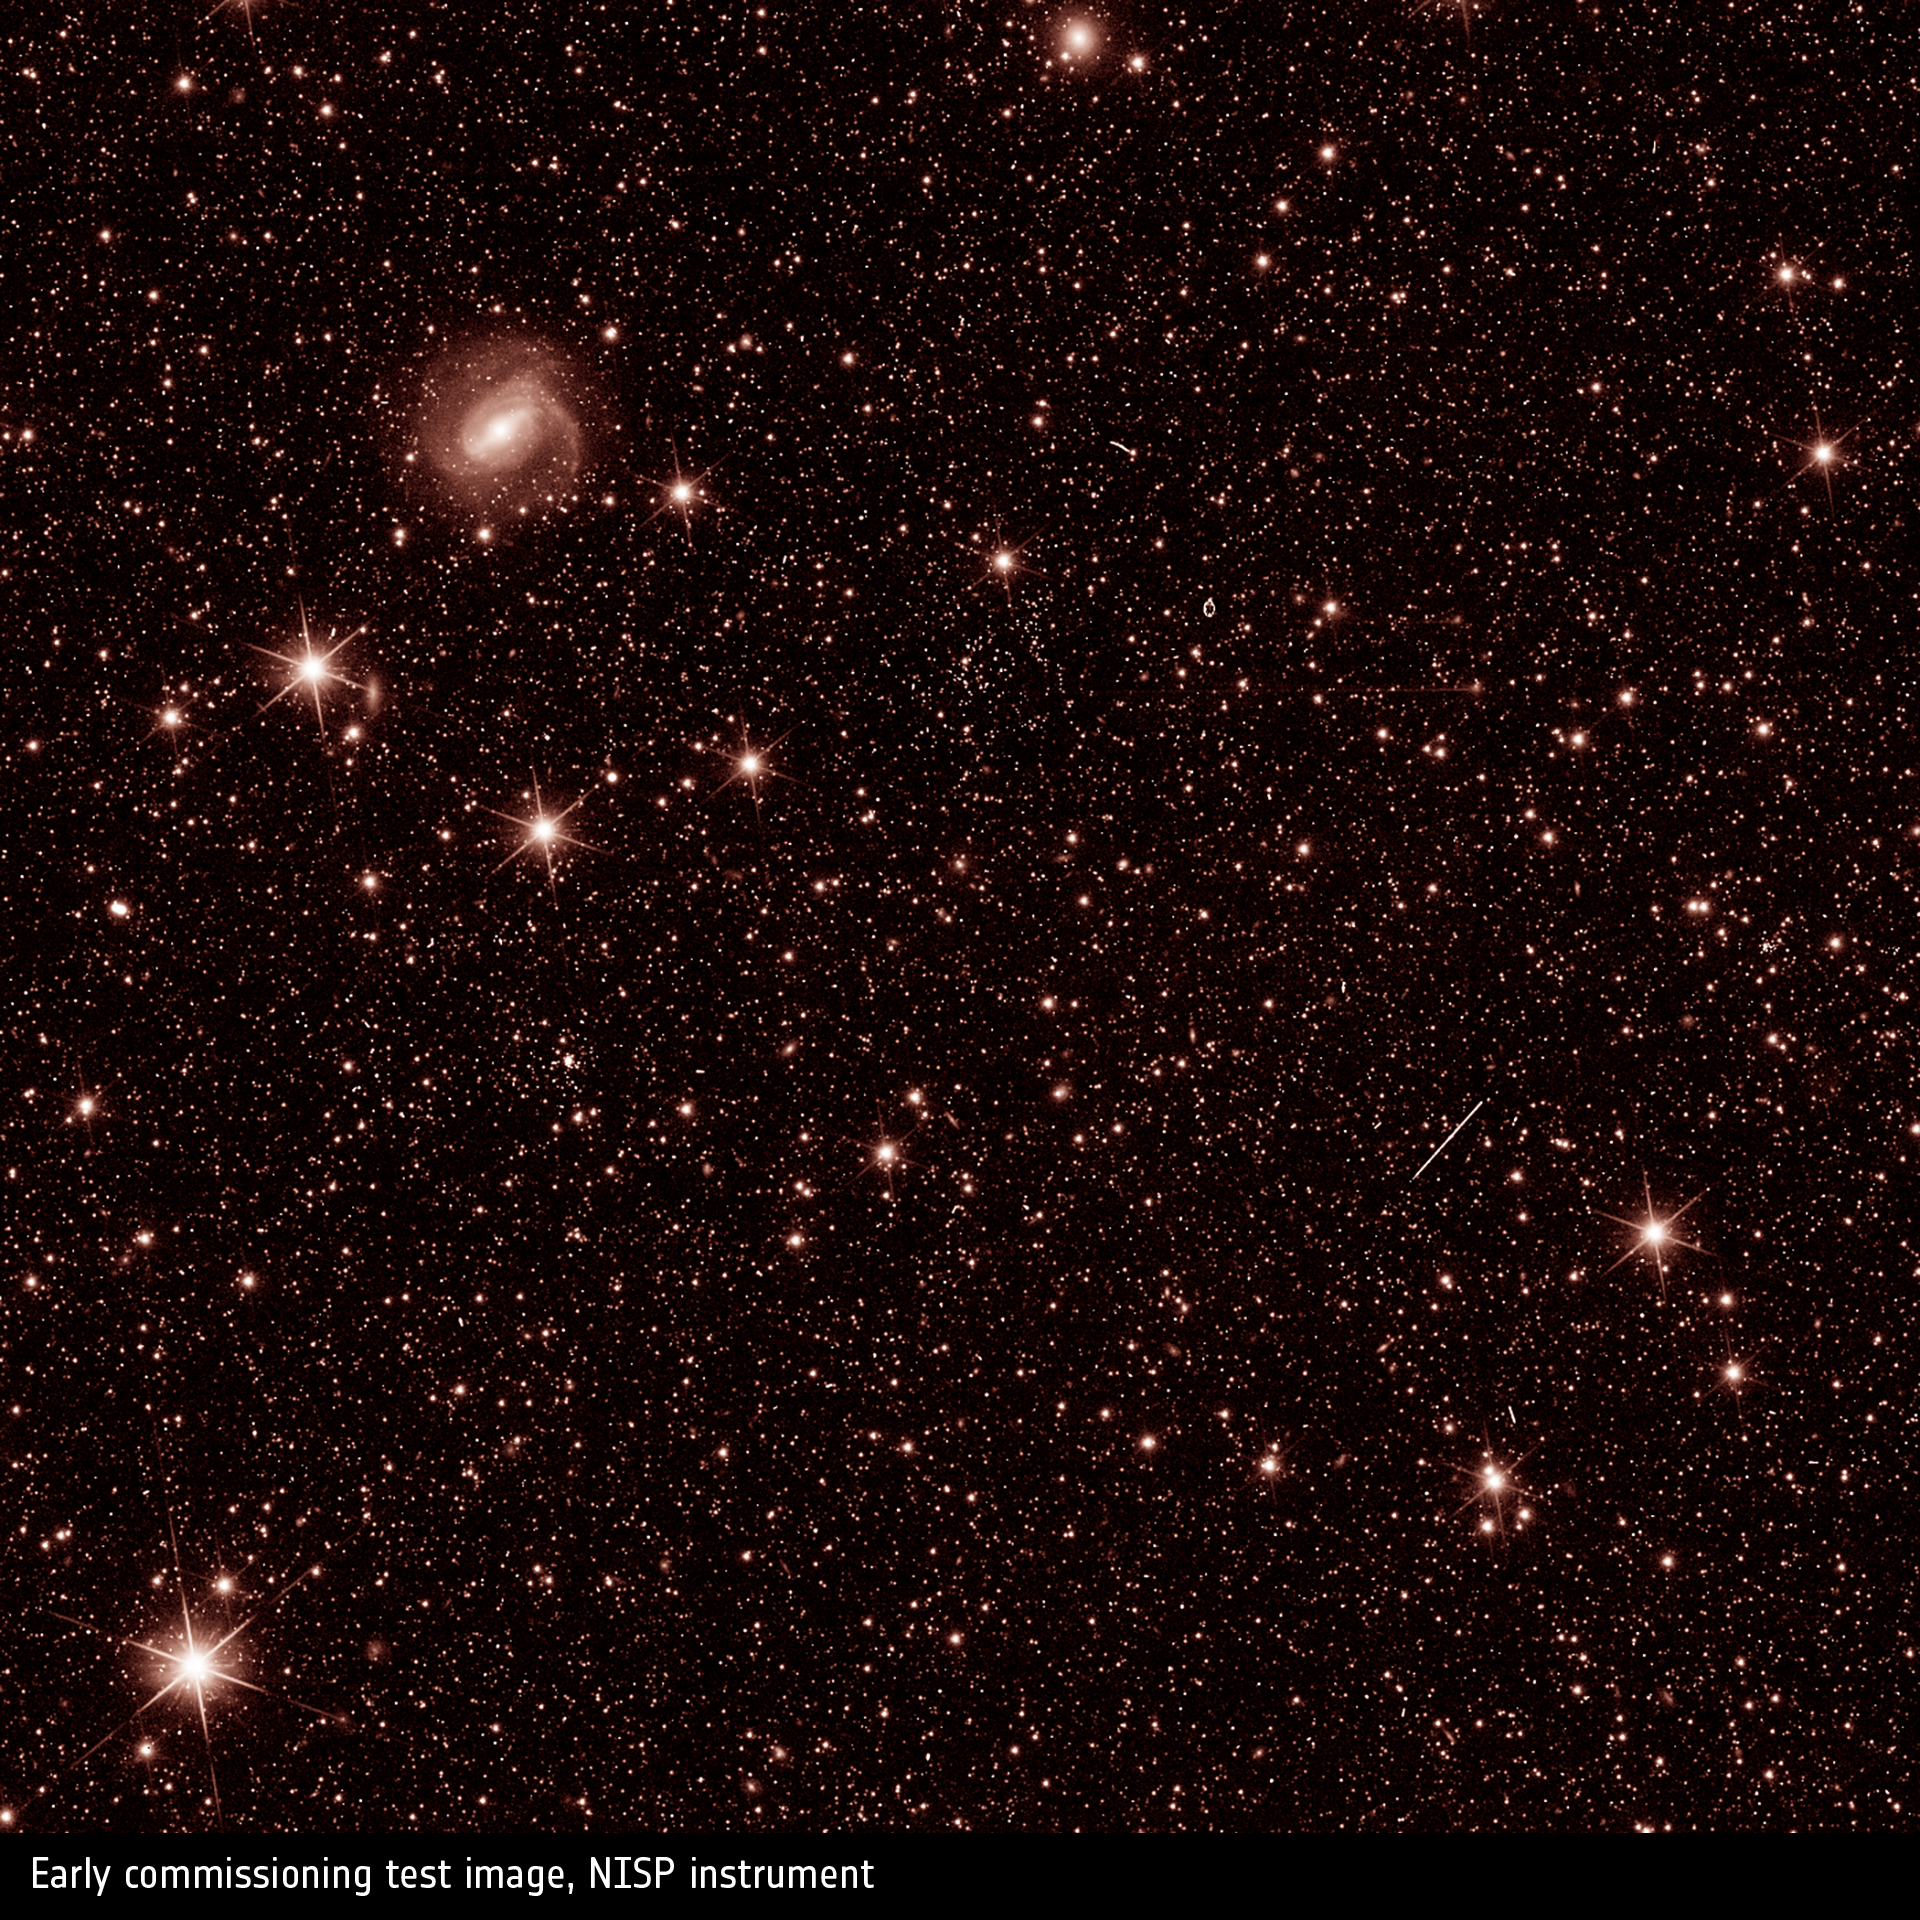 A view of stars by NISP